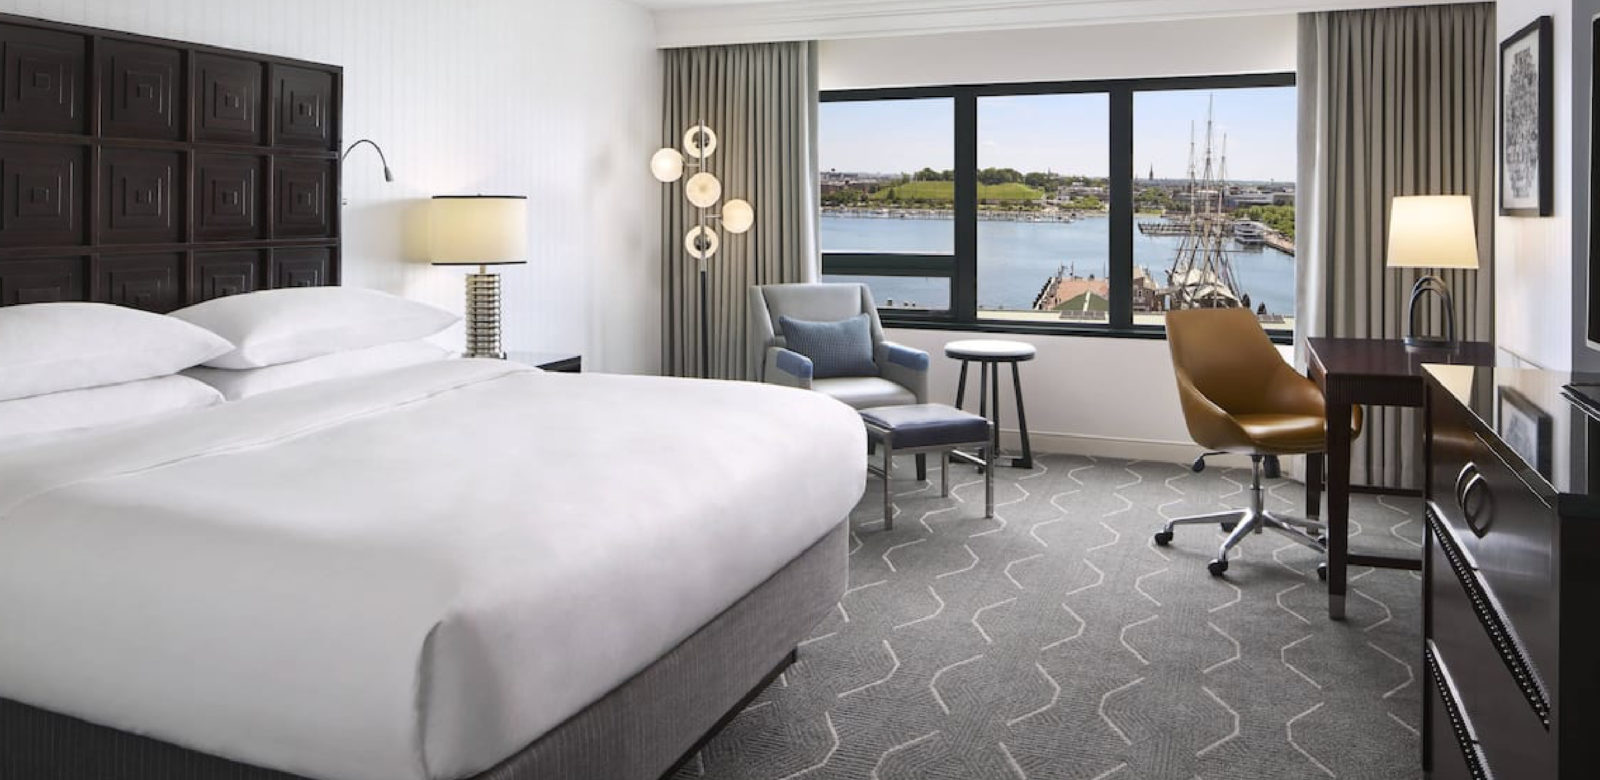 Room with bed, desk, and seating are with view of harbor